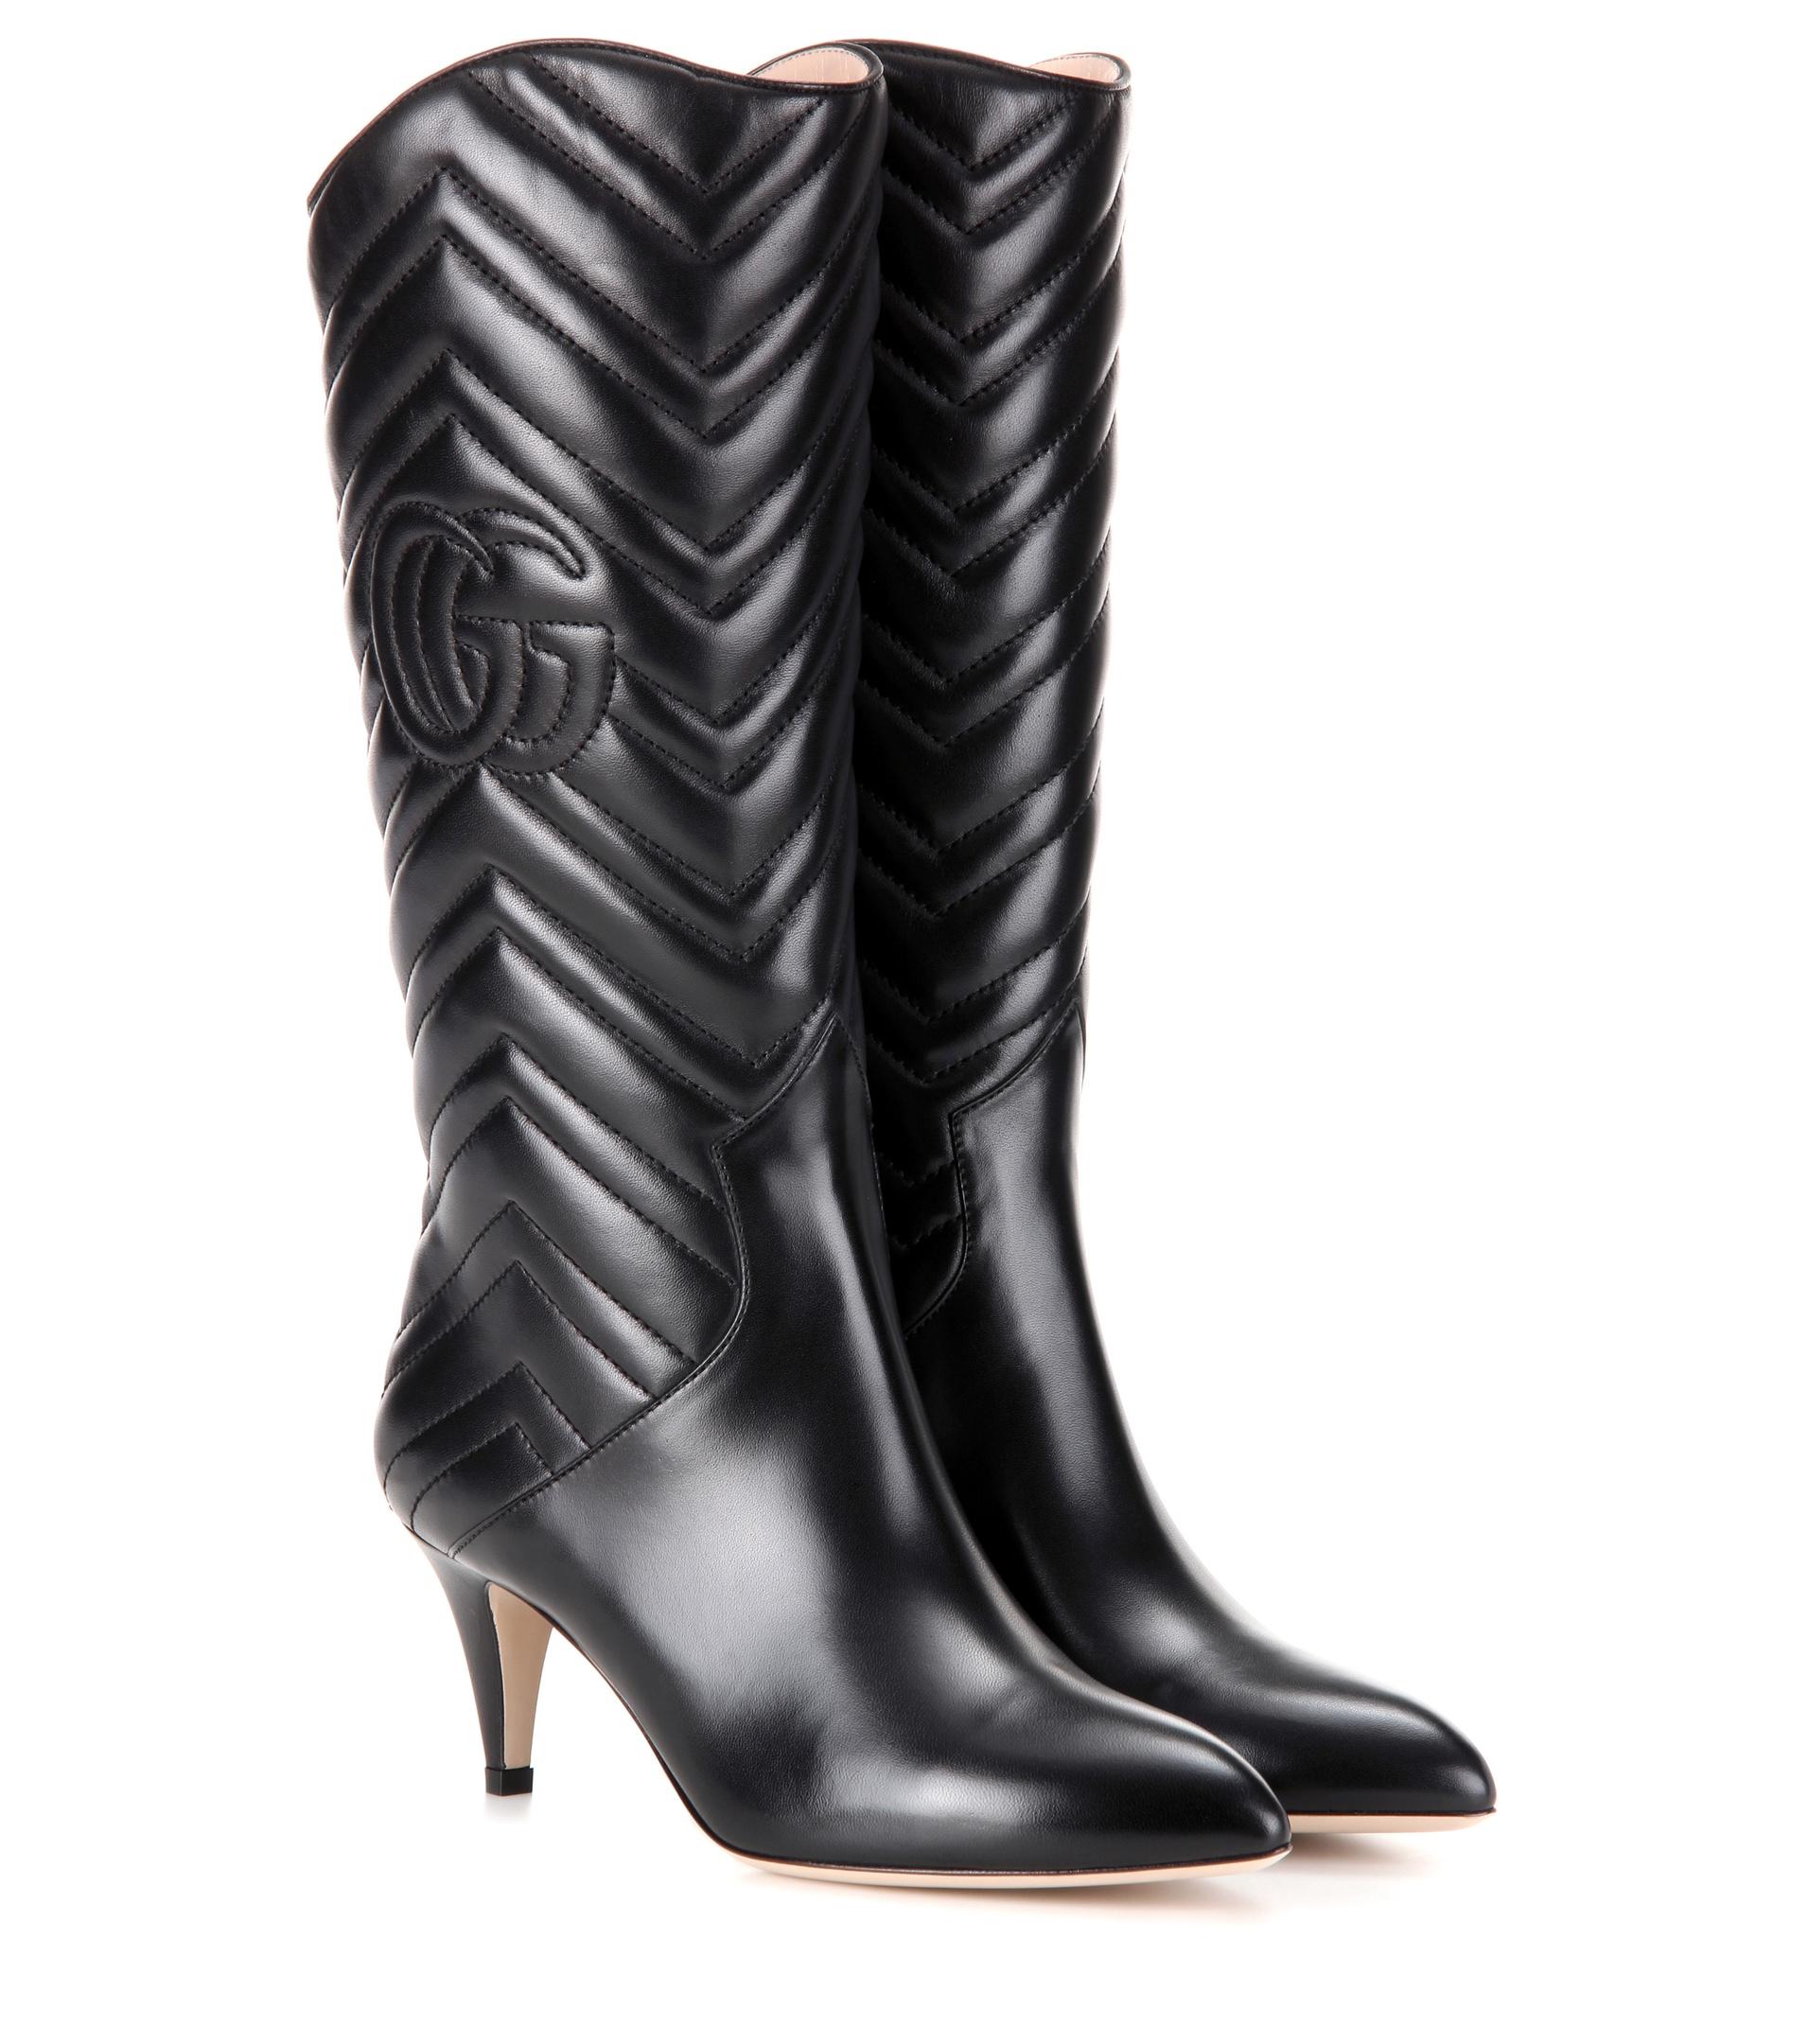 Gucci Matelassé Leather Boots in Black | Lyst